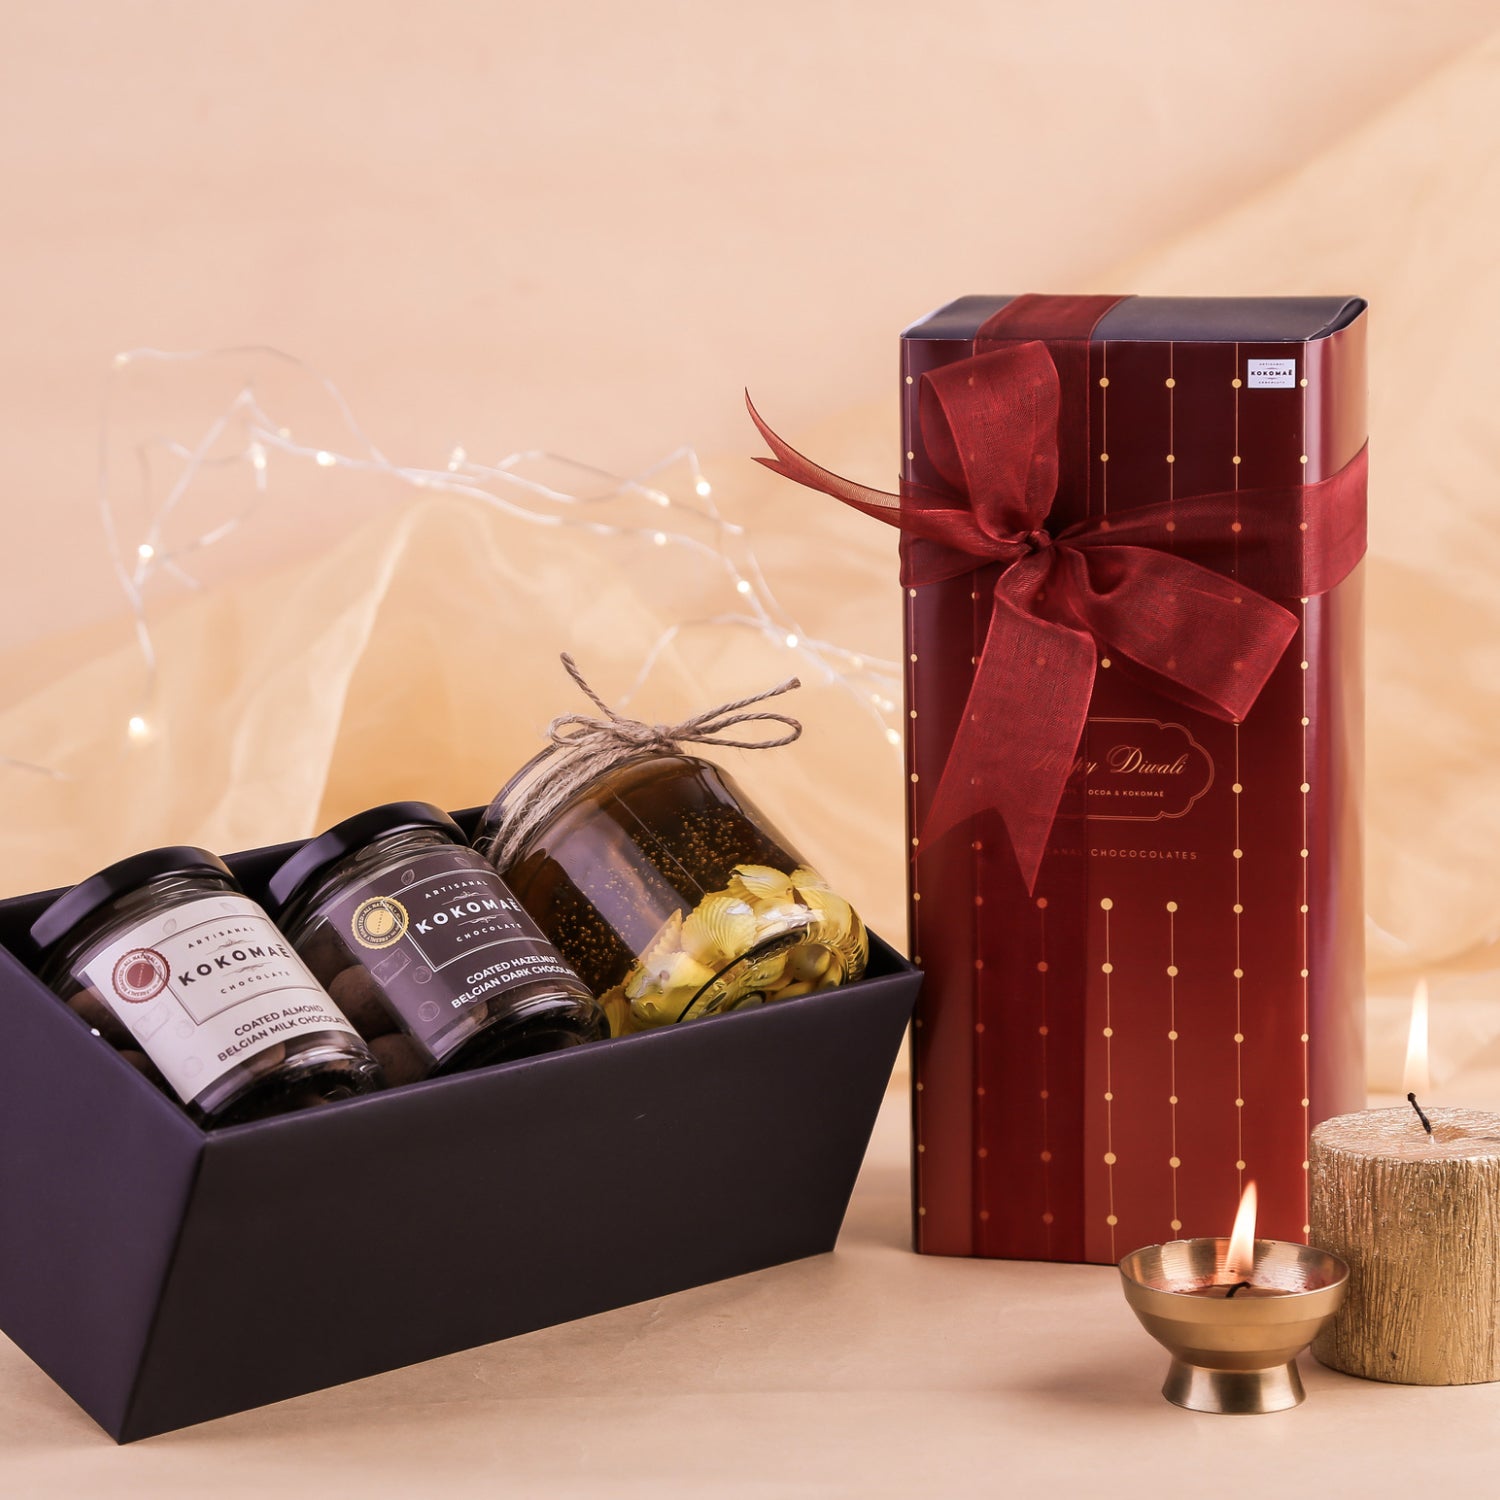 Kokomaē Nutty Hamper for Diwali with 2 Belgian Coated Nuts & a Candle